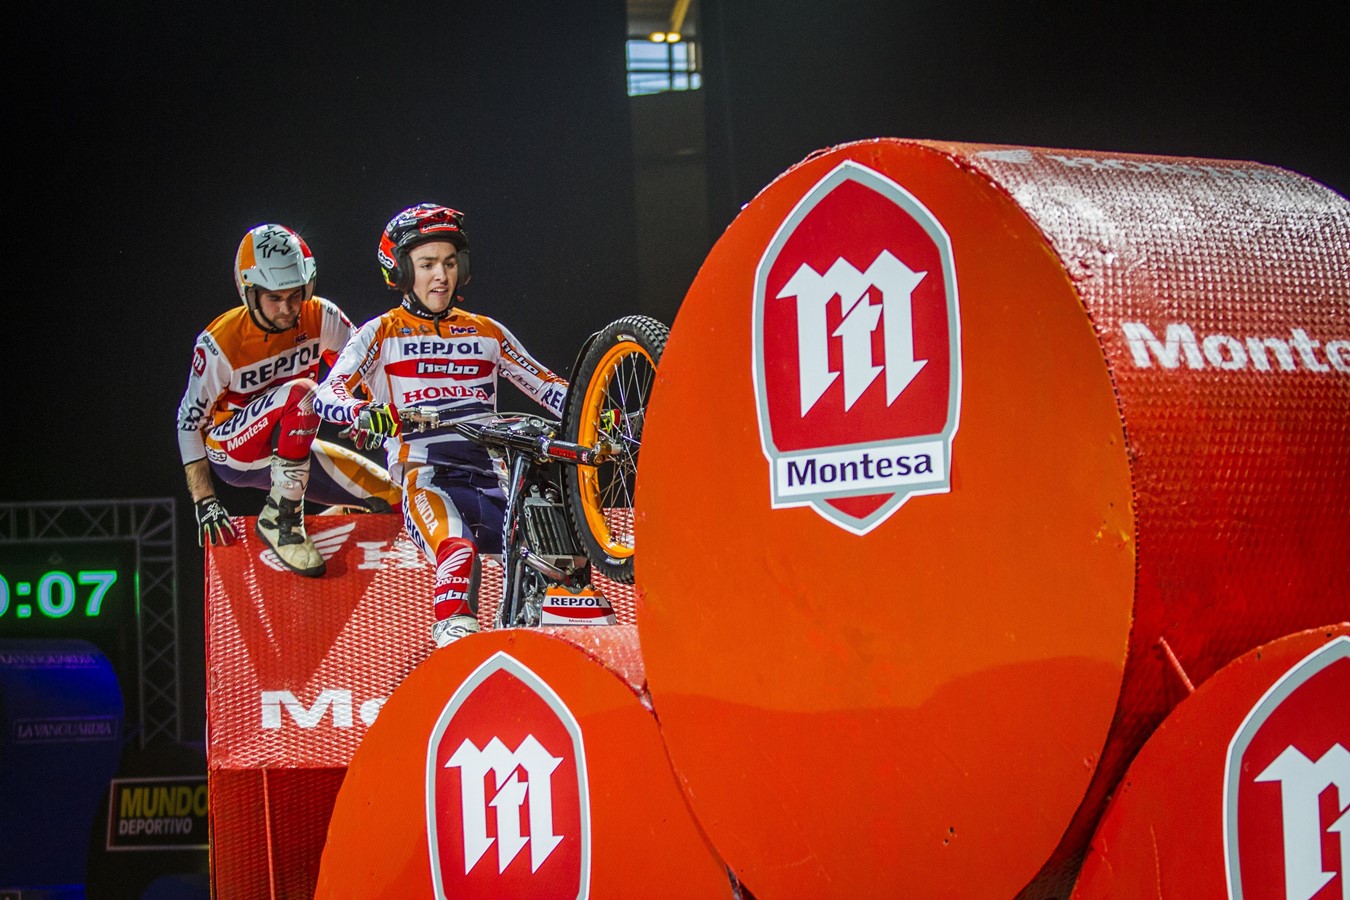 Toni Bou steamrolls the opposition as the Trial World Championship opens its 40th edition in Barcelona